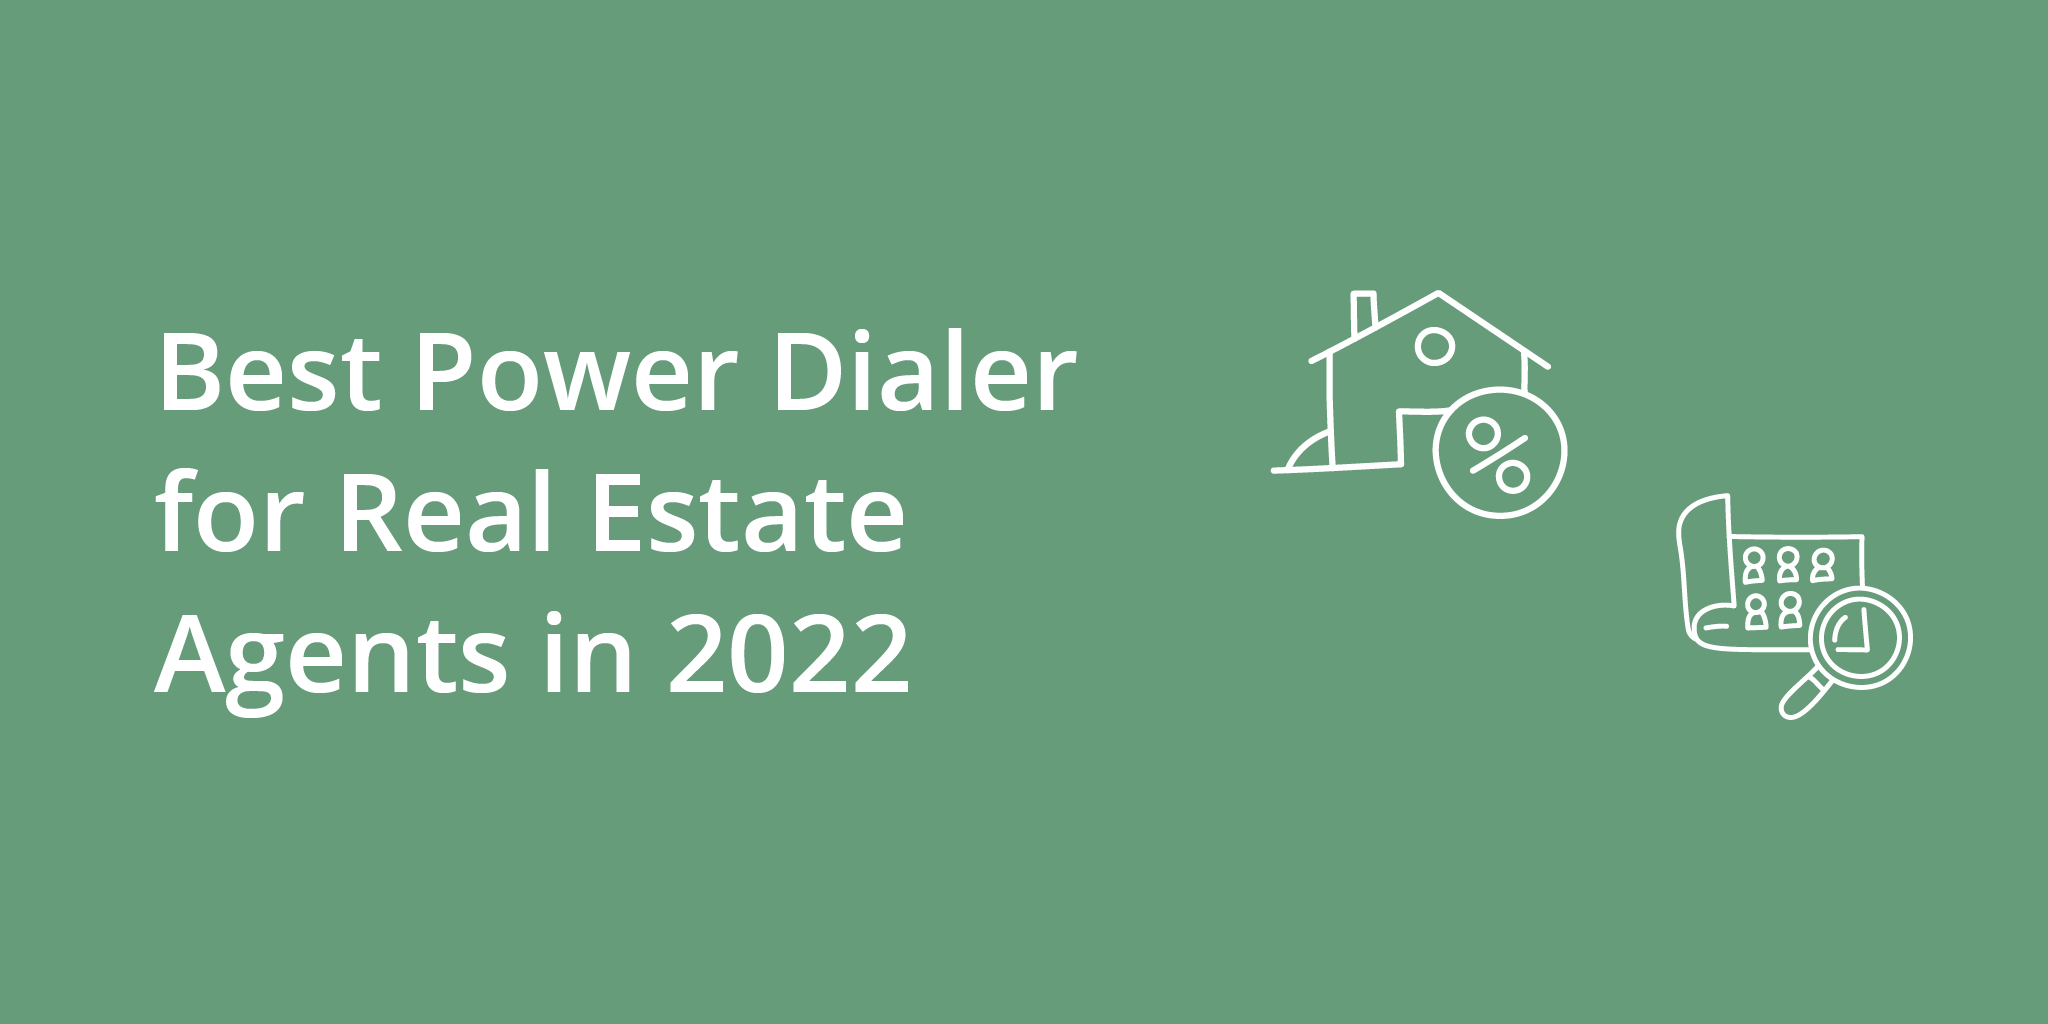 Best Power Dialer for Real Estate Agents in 2022 | Telephones for business